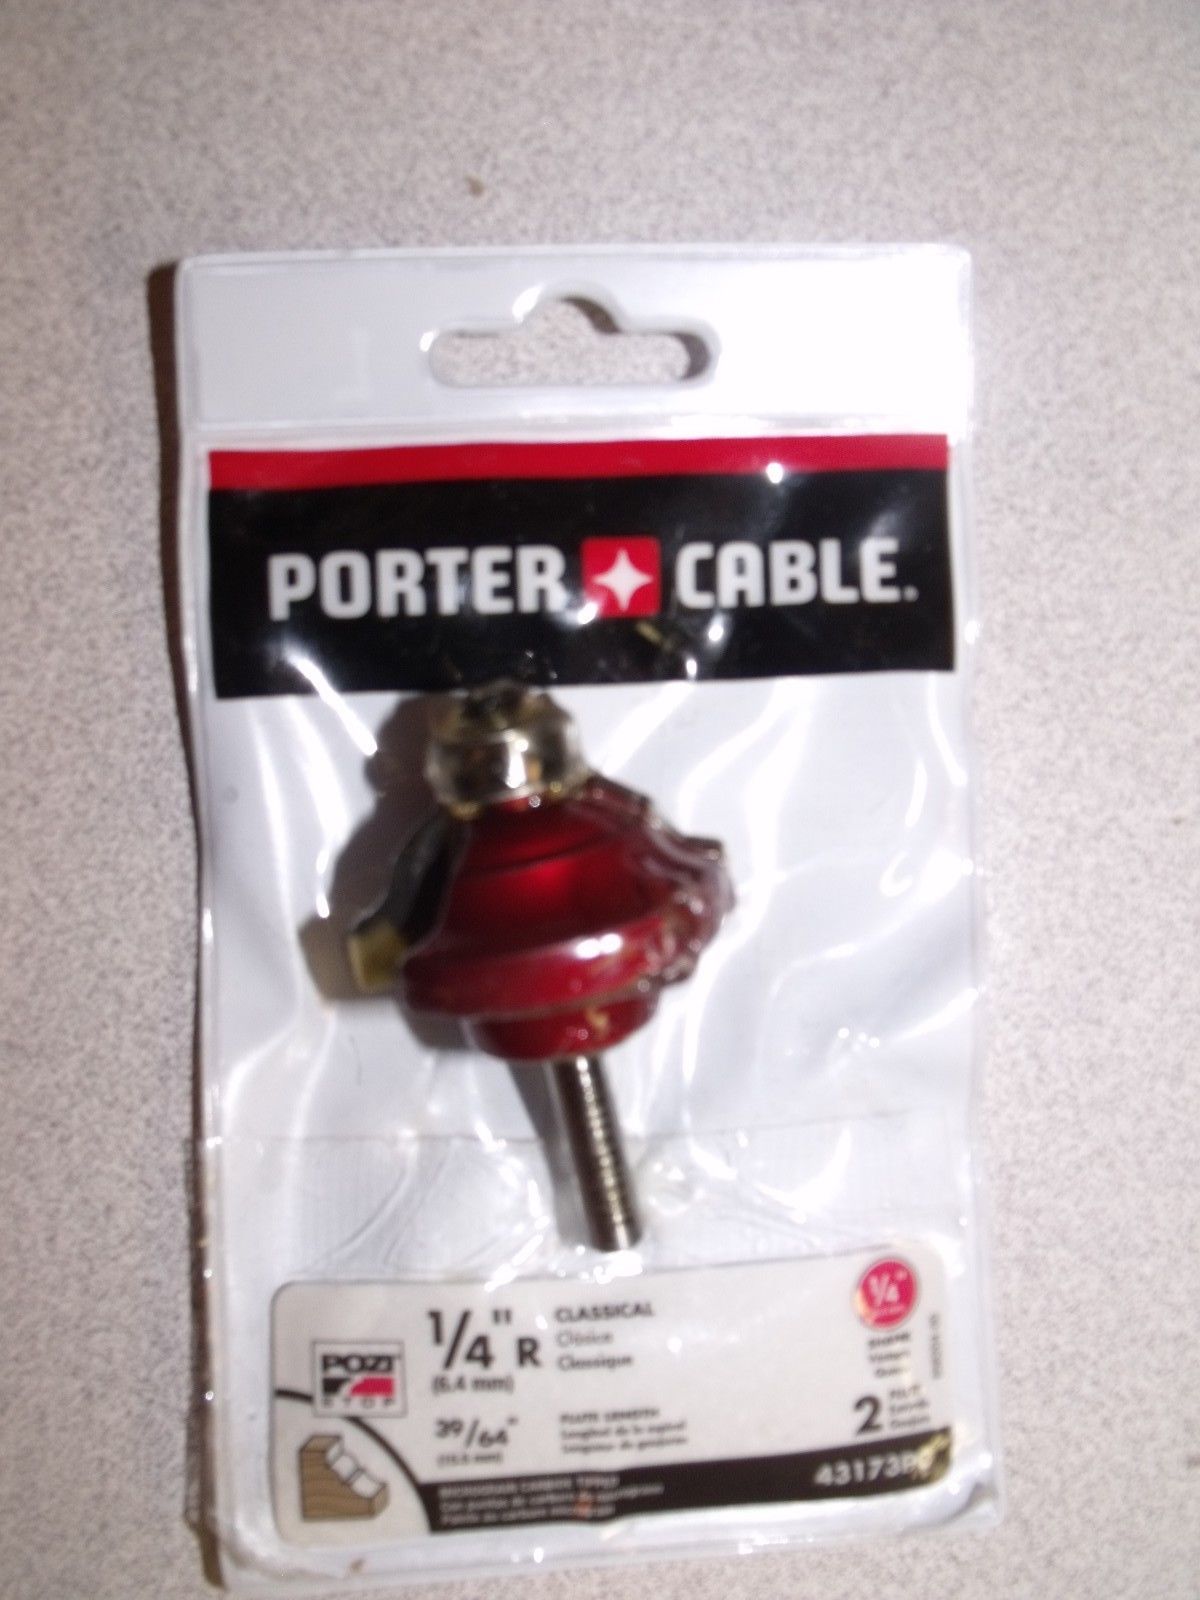 Porter Cable 43173PC 1/4 Classical Router Bit 1/4 Shank